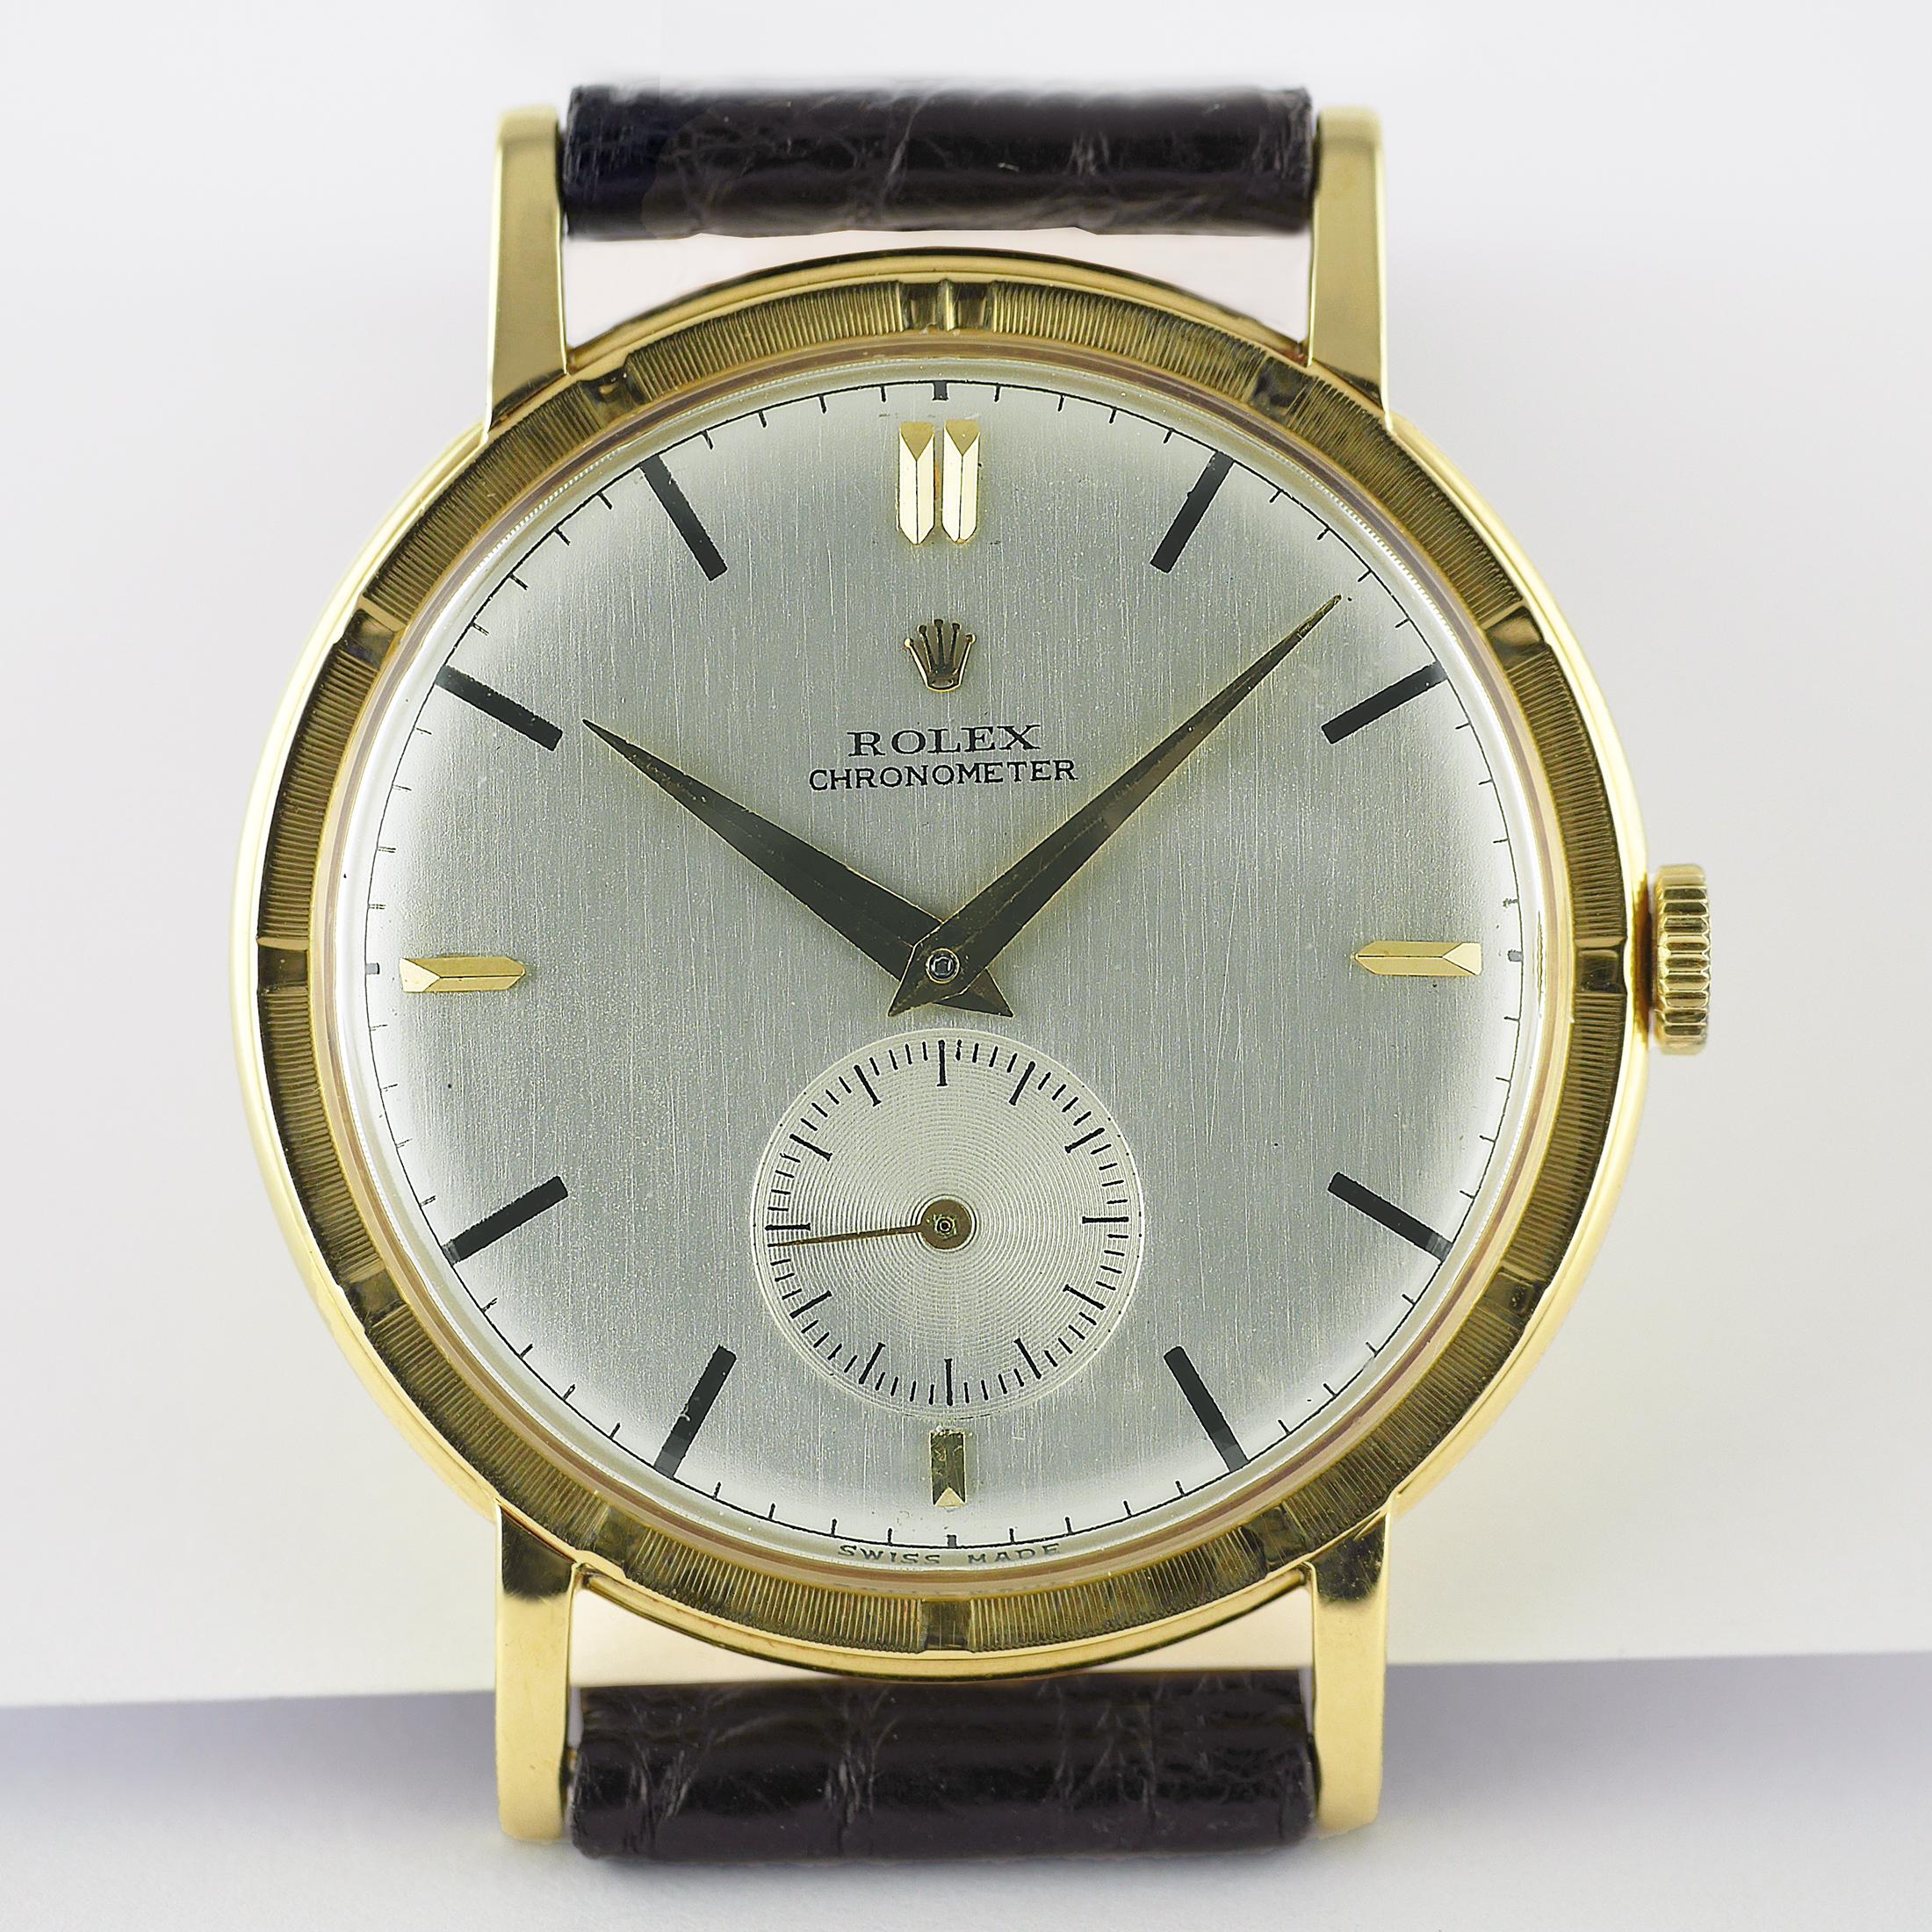 Rolex Precision Gold Wristwatch c1947 In Excellent Condition For Sale In London, GB